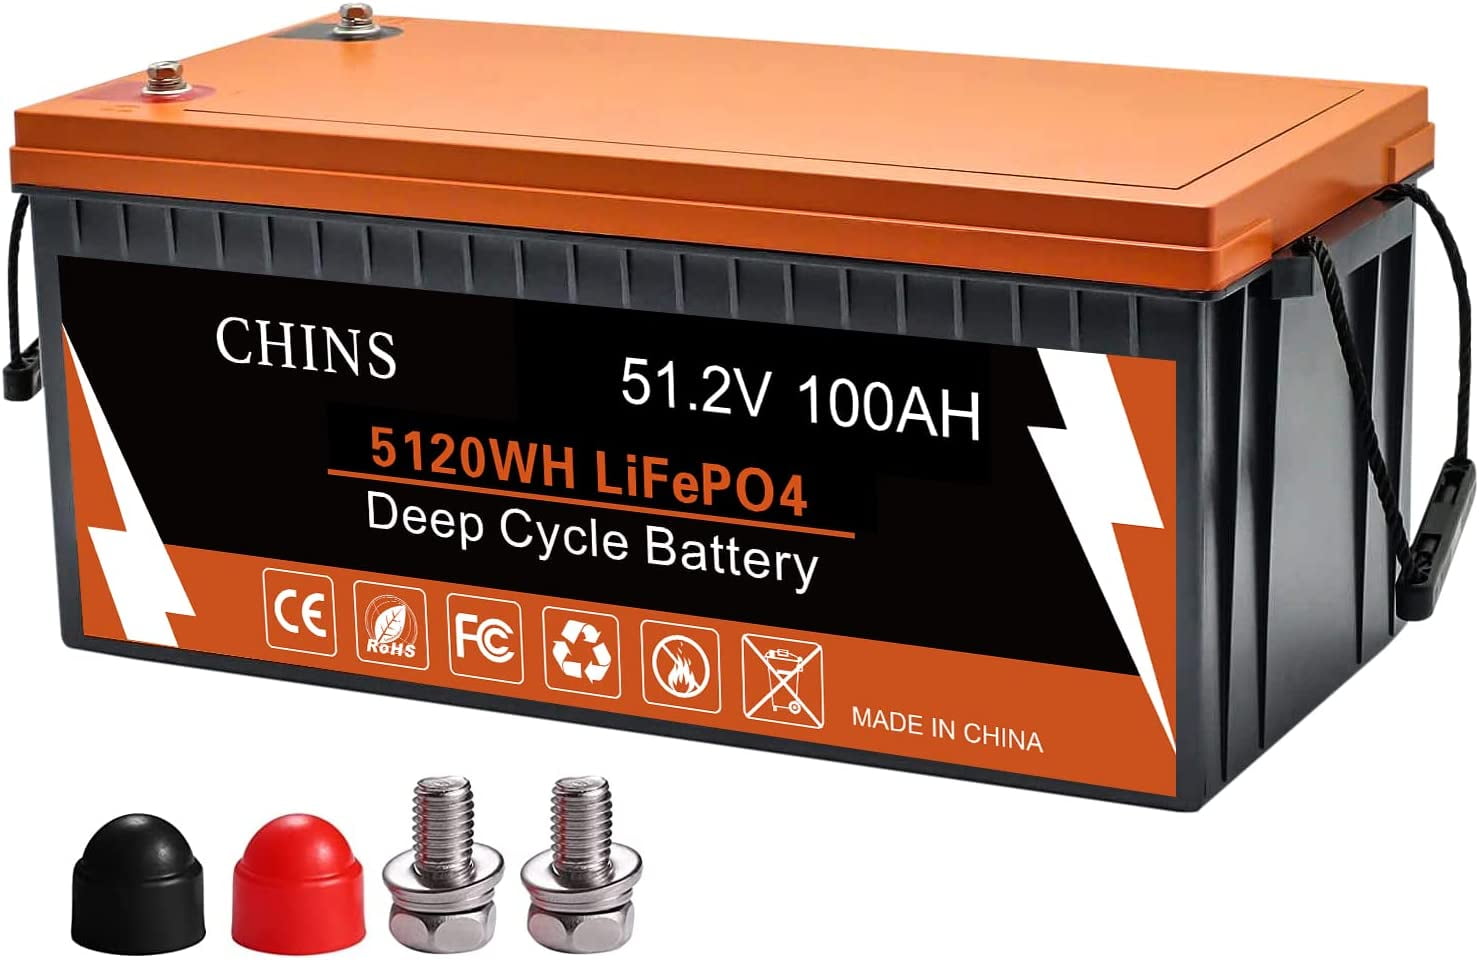 CHINS Bluetooth 48V 100AH LiFePO4 Lithium Battery, Built-in 100A